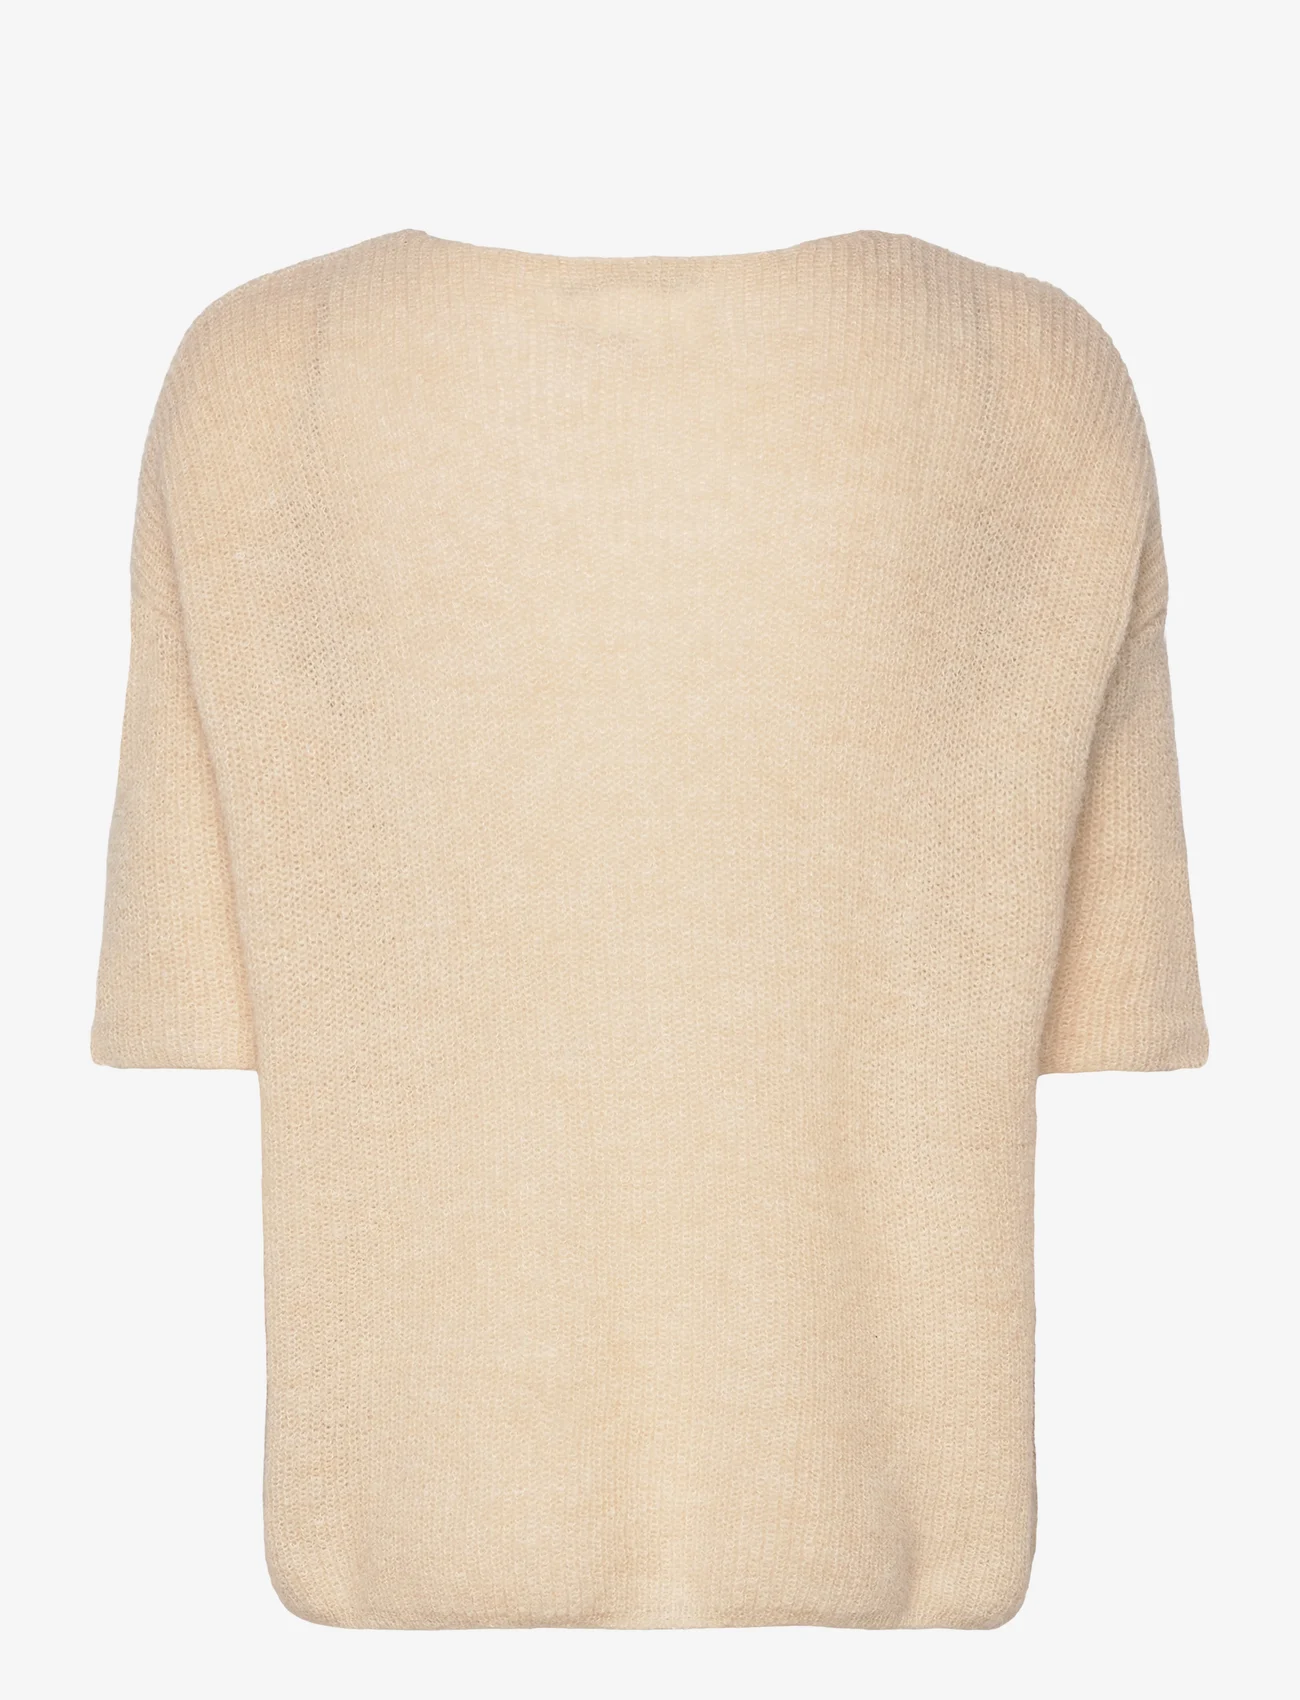 Soaked in Luxury - SLTuesday Jumper - swetry - sandshell - 1